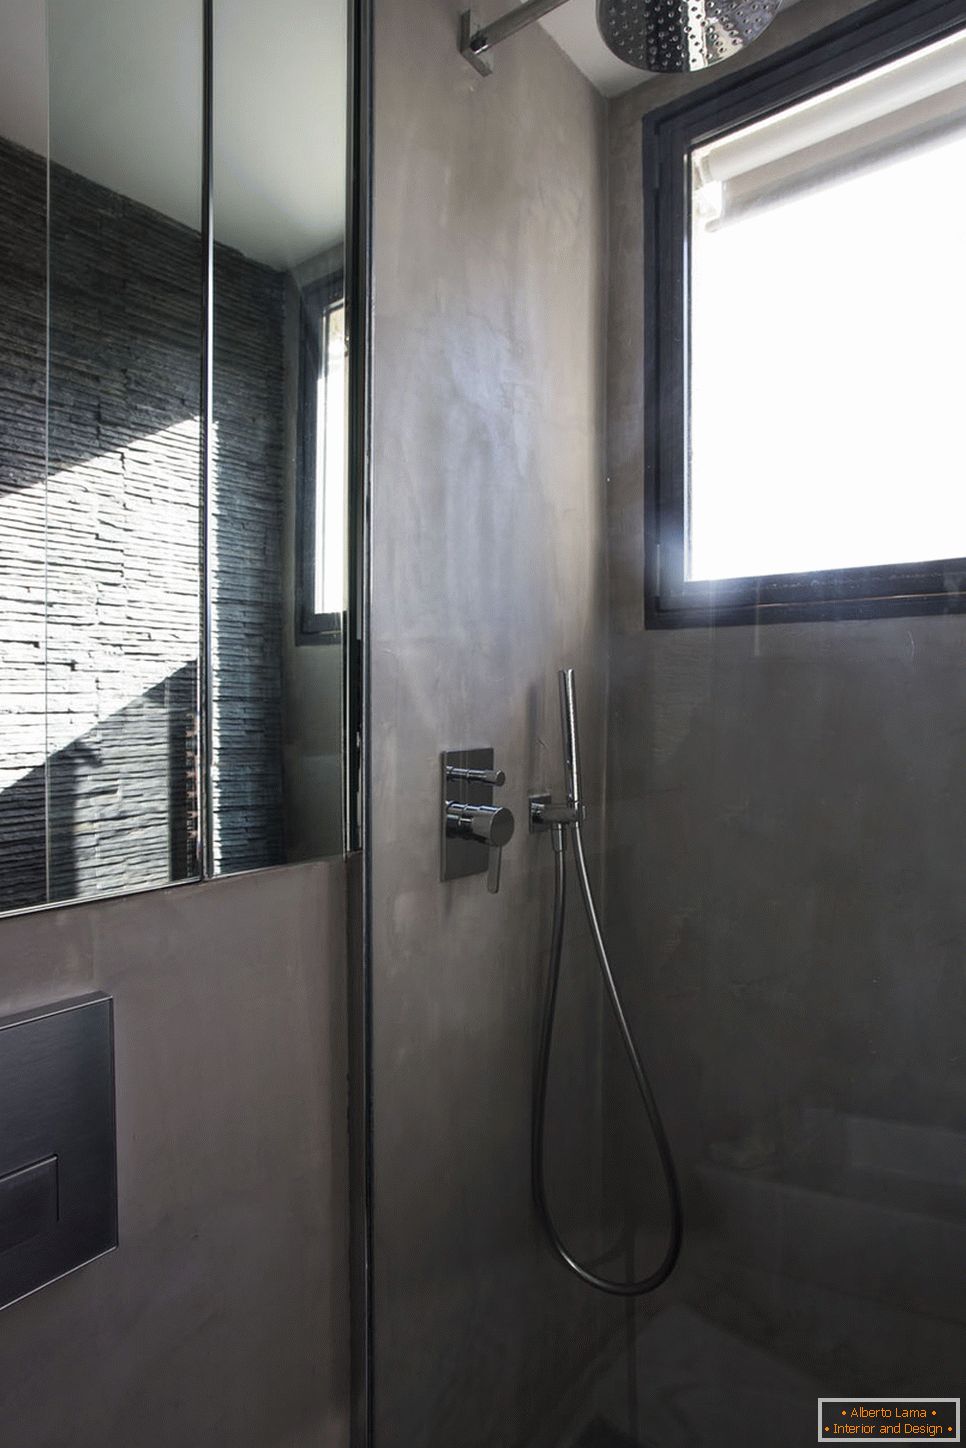 Shower cubicle in the interior of small size